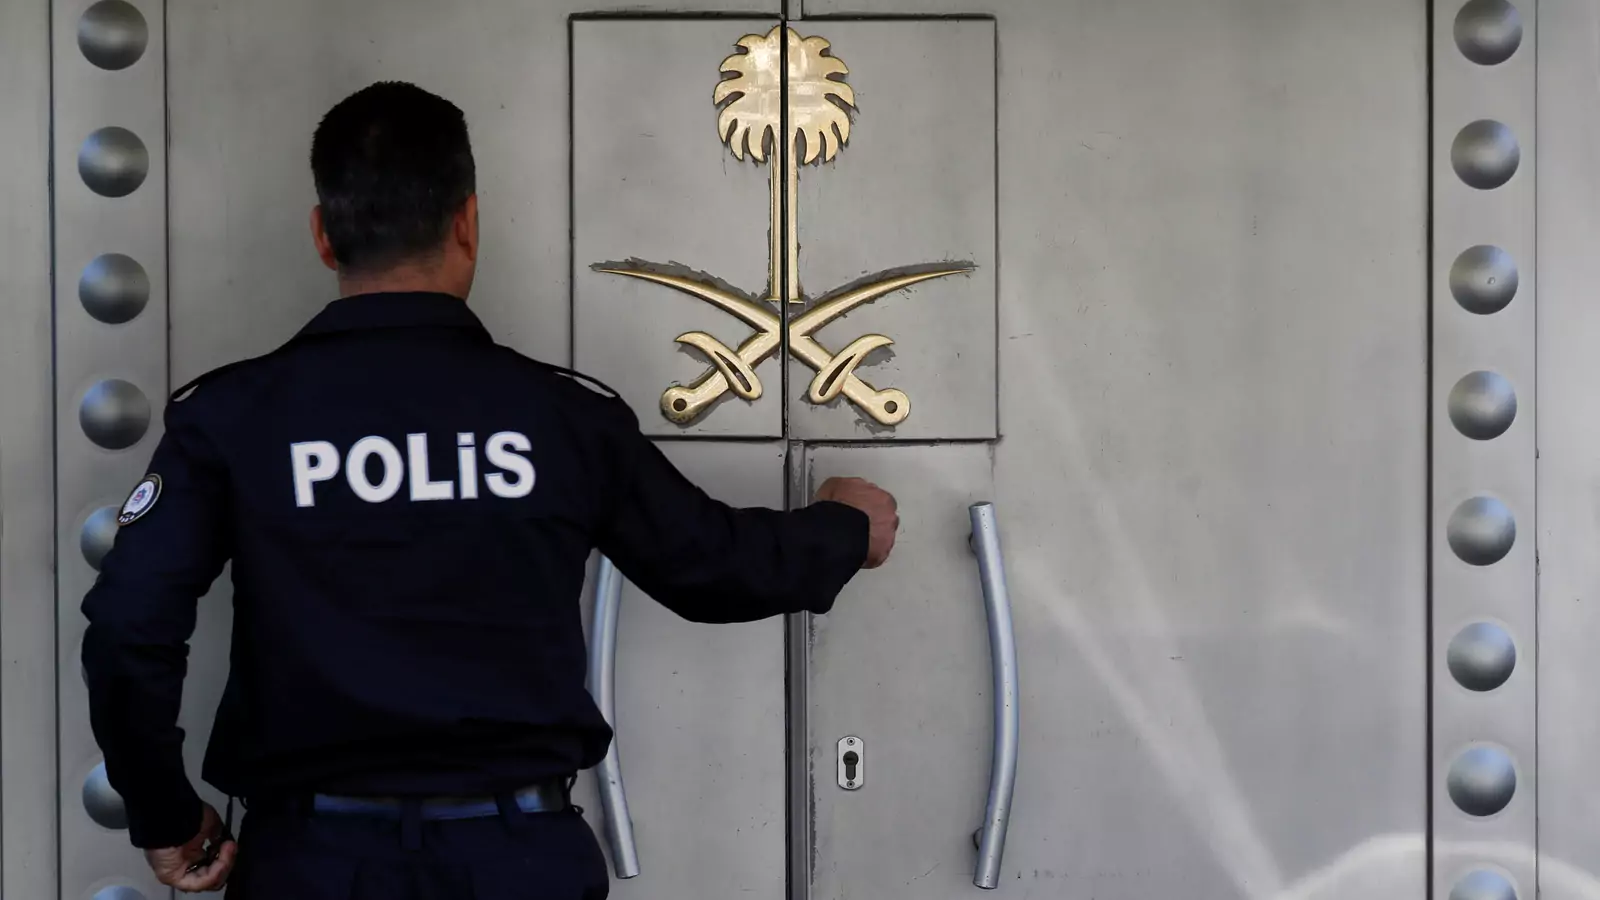 A Turkish police officer who stands guard at the Saudi Arabia's consulate is seen at the entrance, in Istanbul, Turkey October 10, 2018.